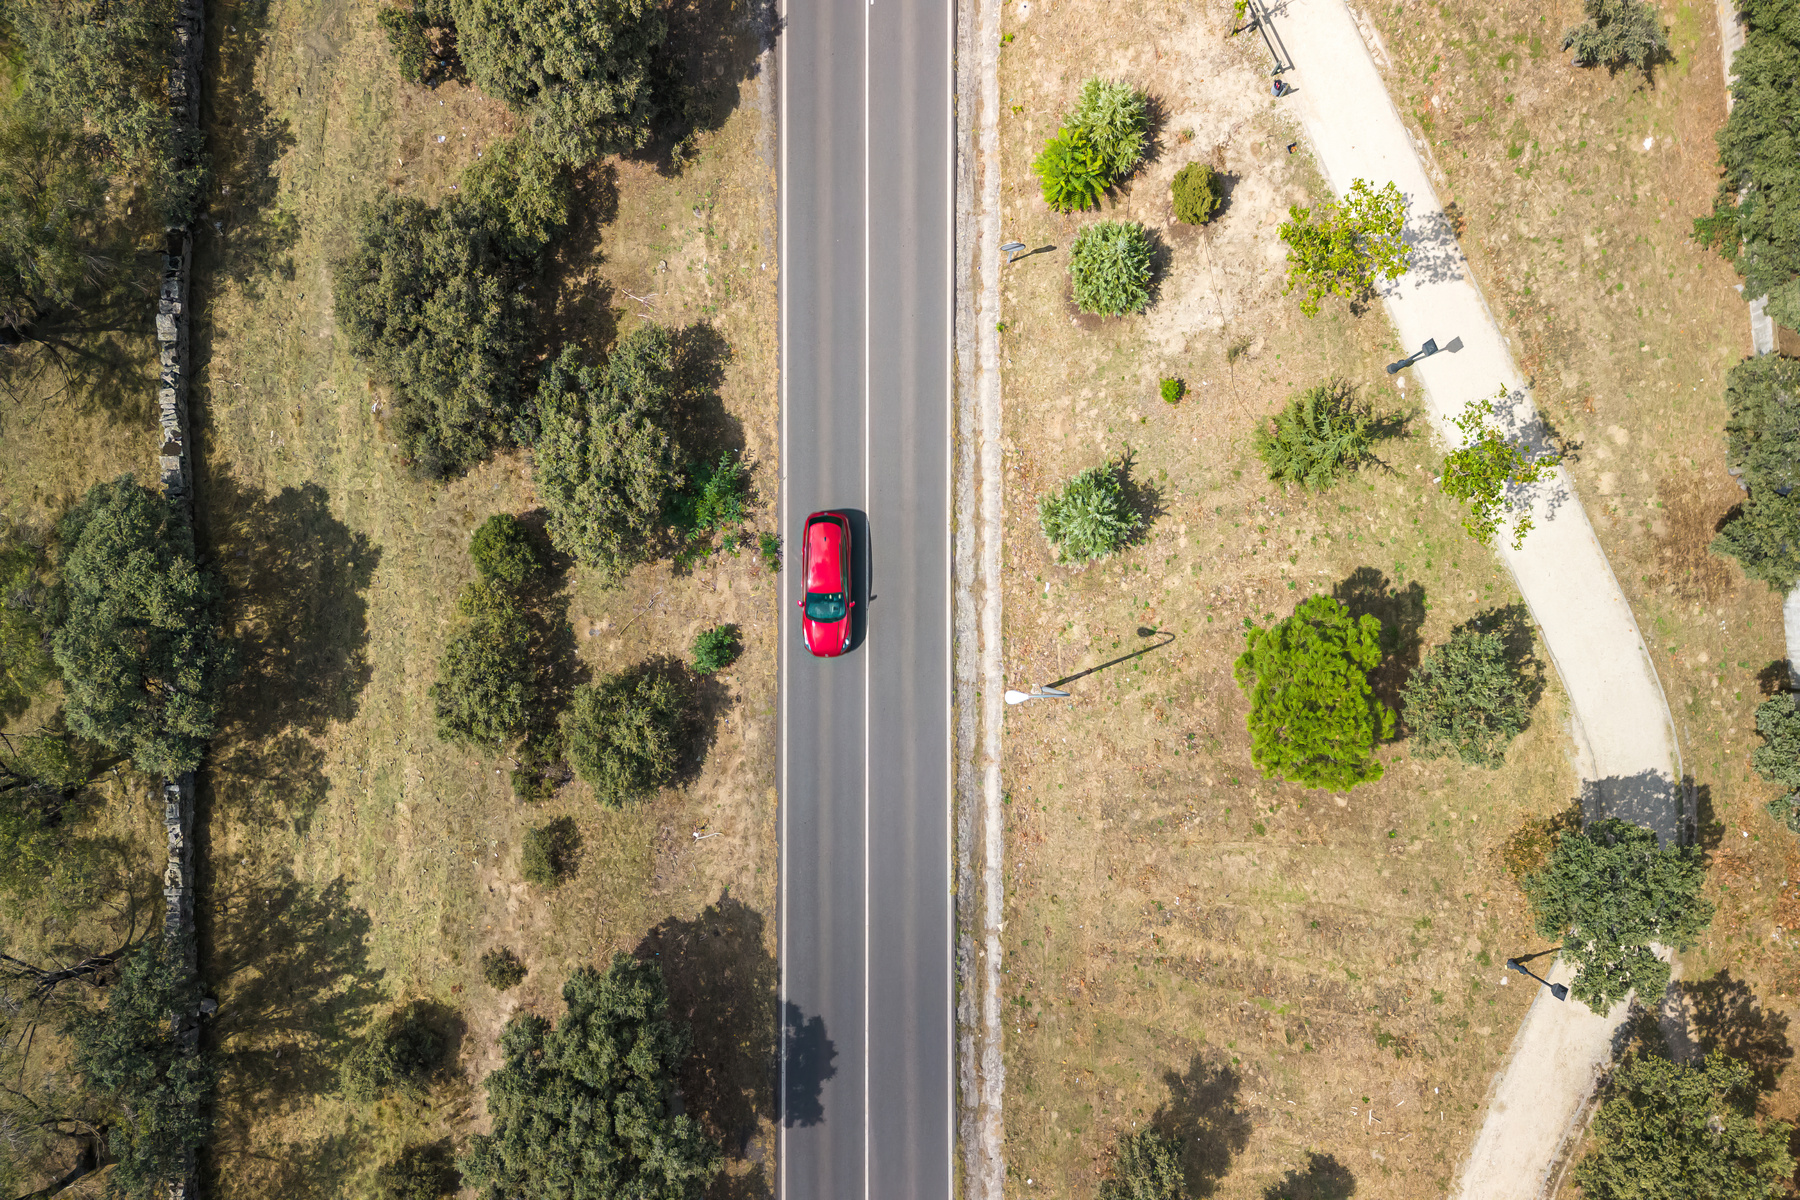 Aerial drone view of a road with vegetation on the sides and a red car driving through it.